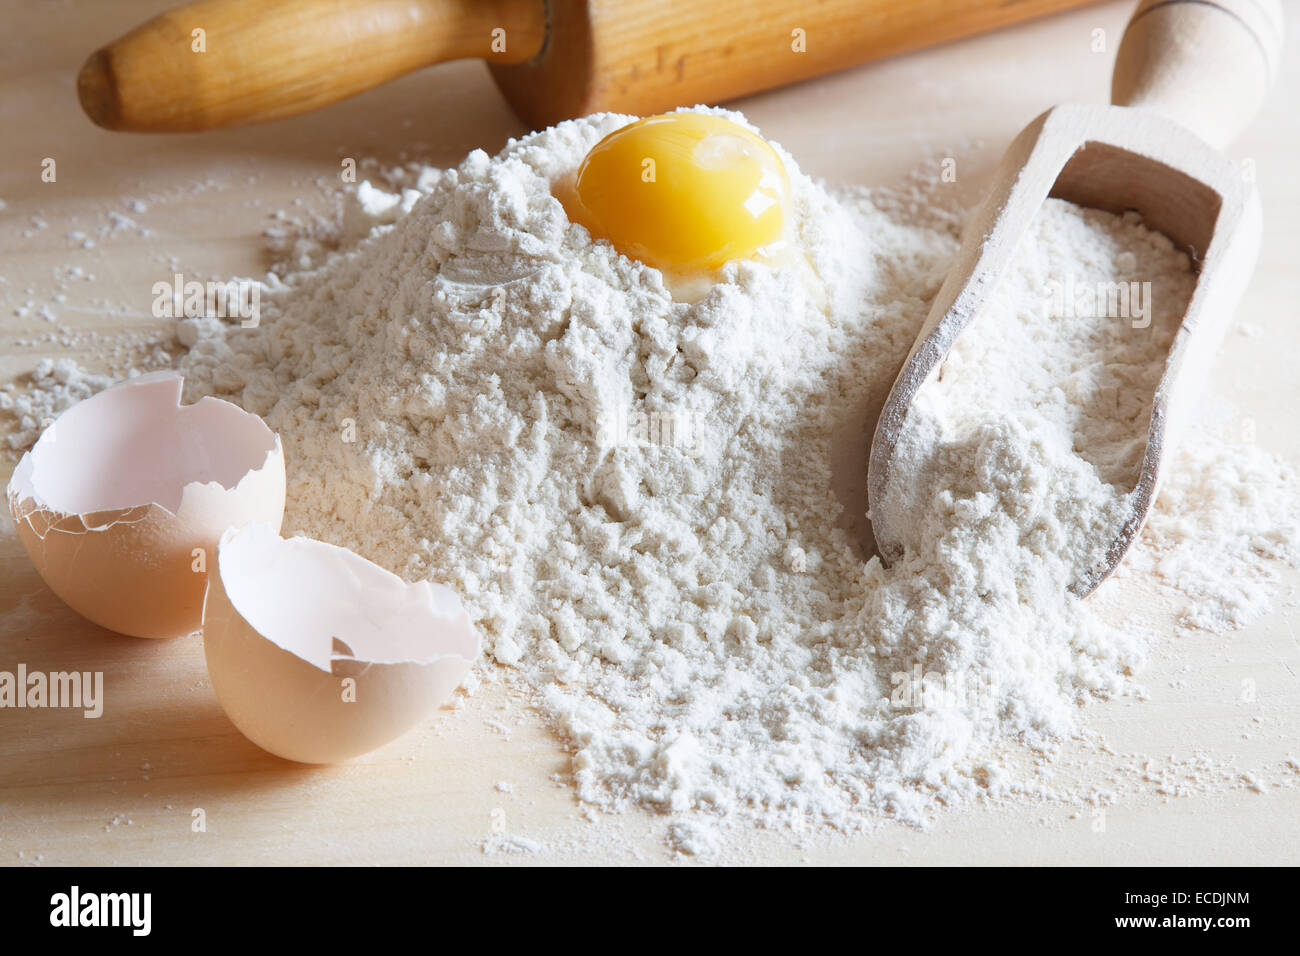 Preparations for homemade baking. Flour and egg on table Stock Photo